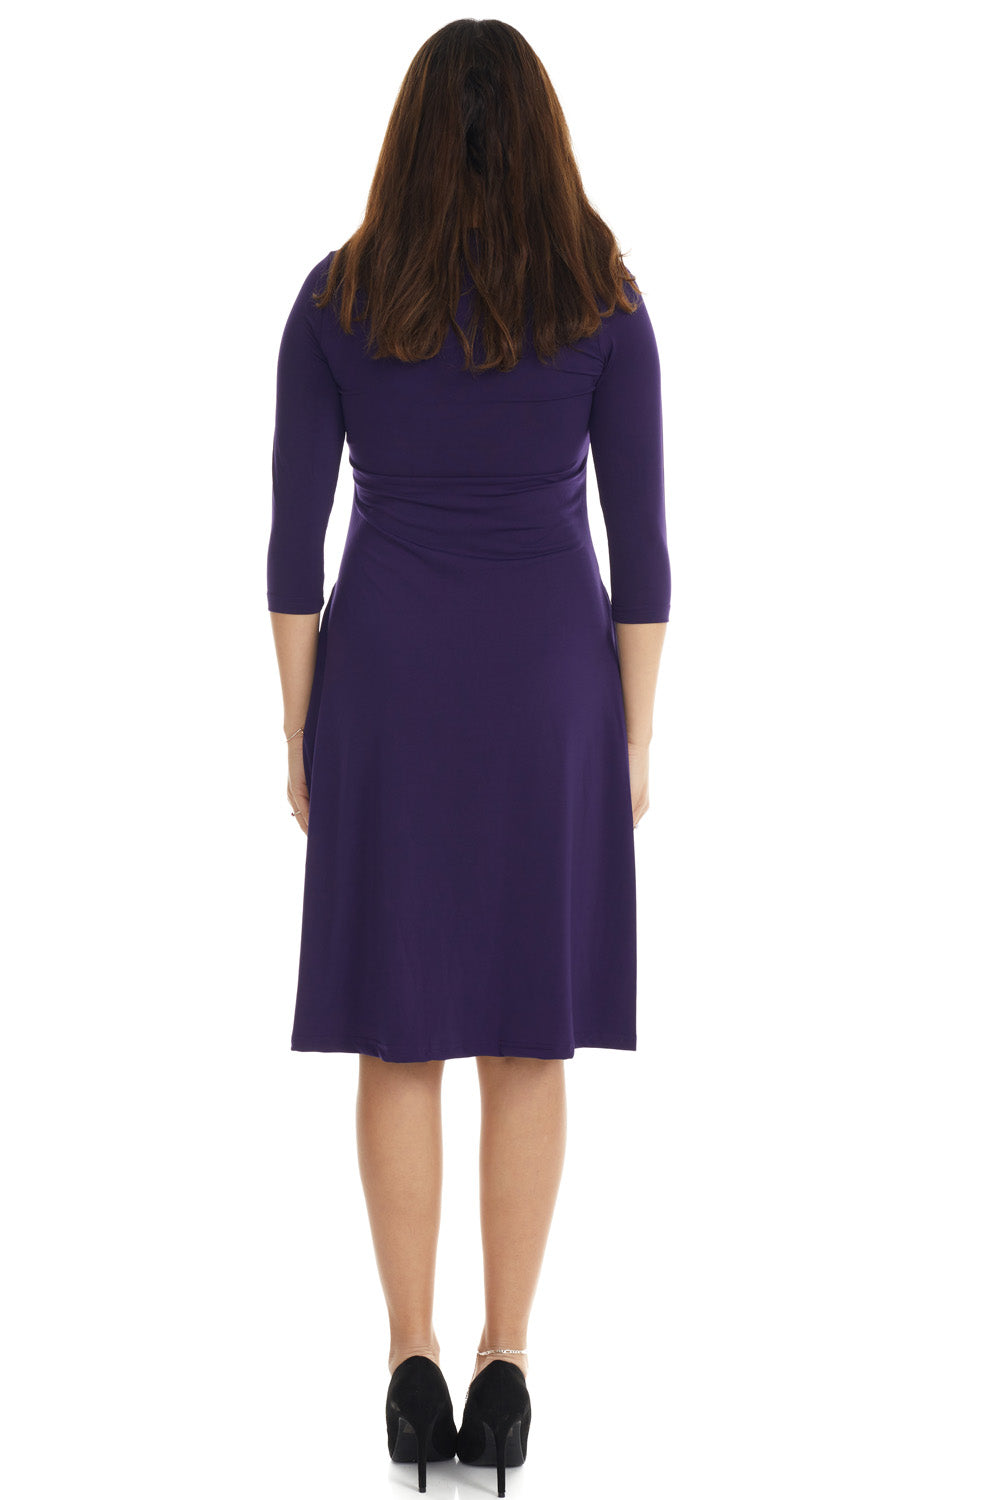 purple flary below knee length 3/4 sleeve crew neck modest tznius a-line dress with pockets big enough for smartphone